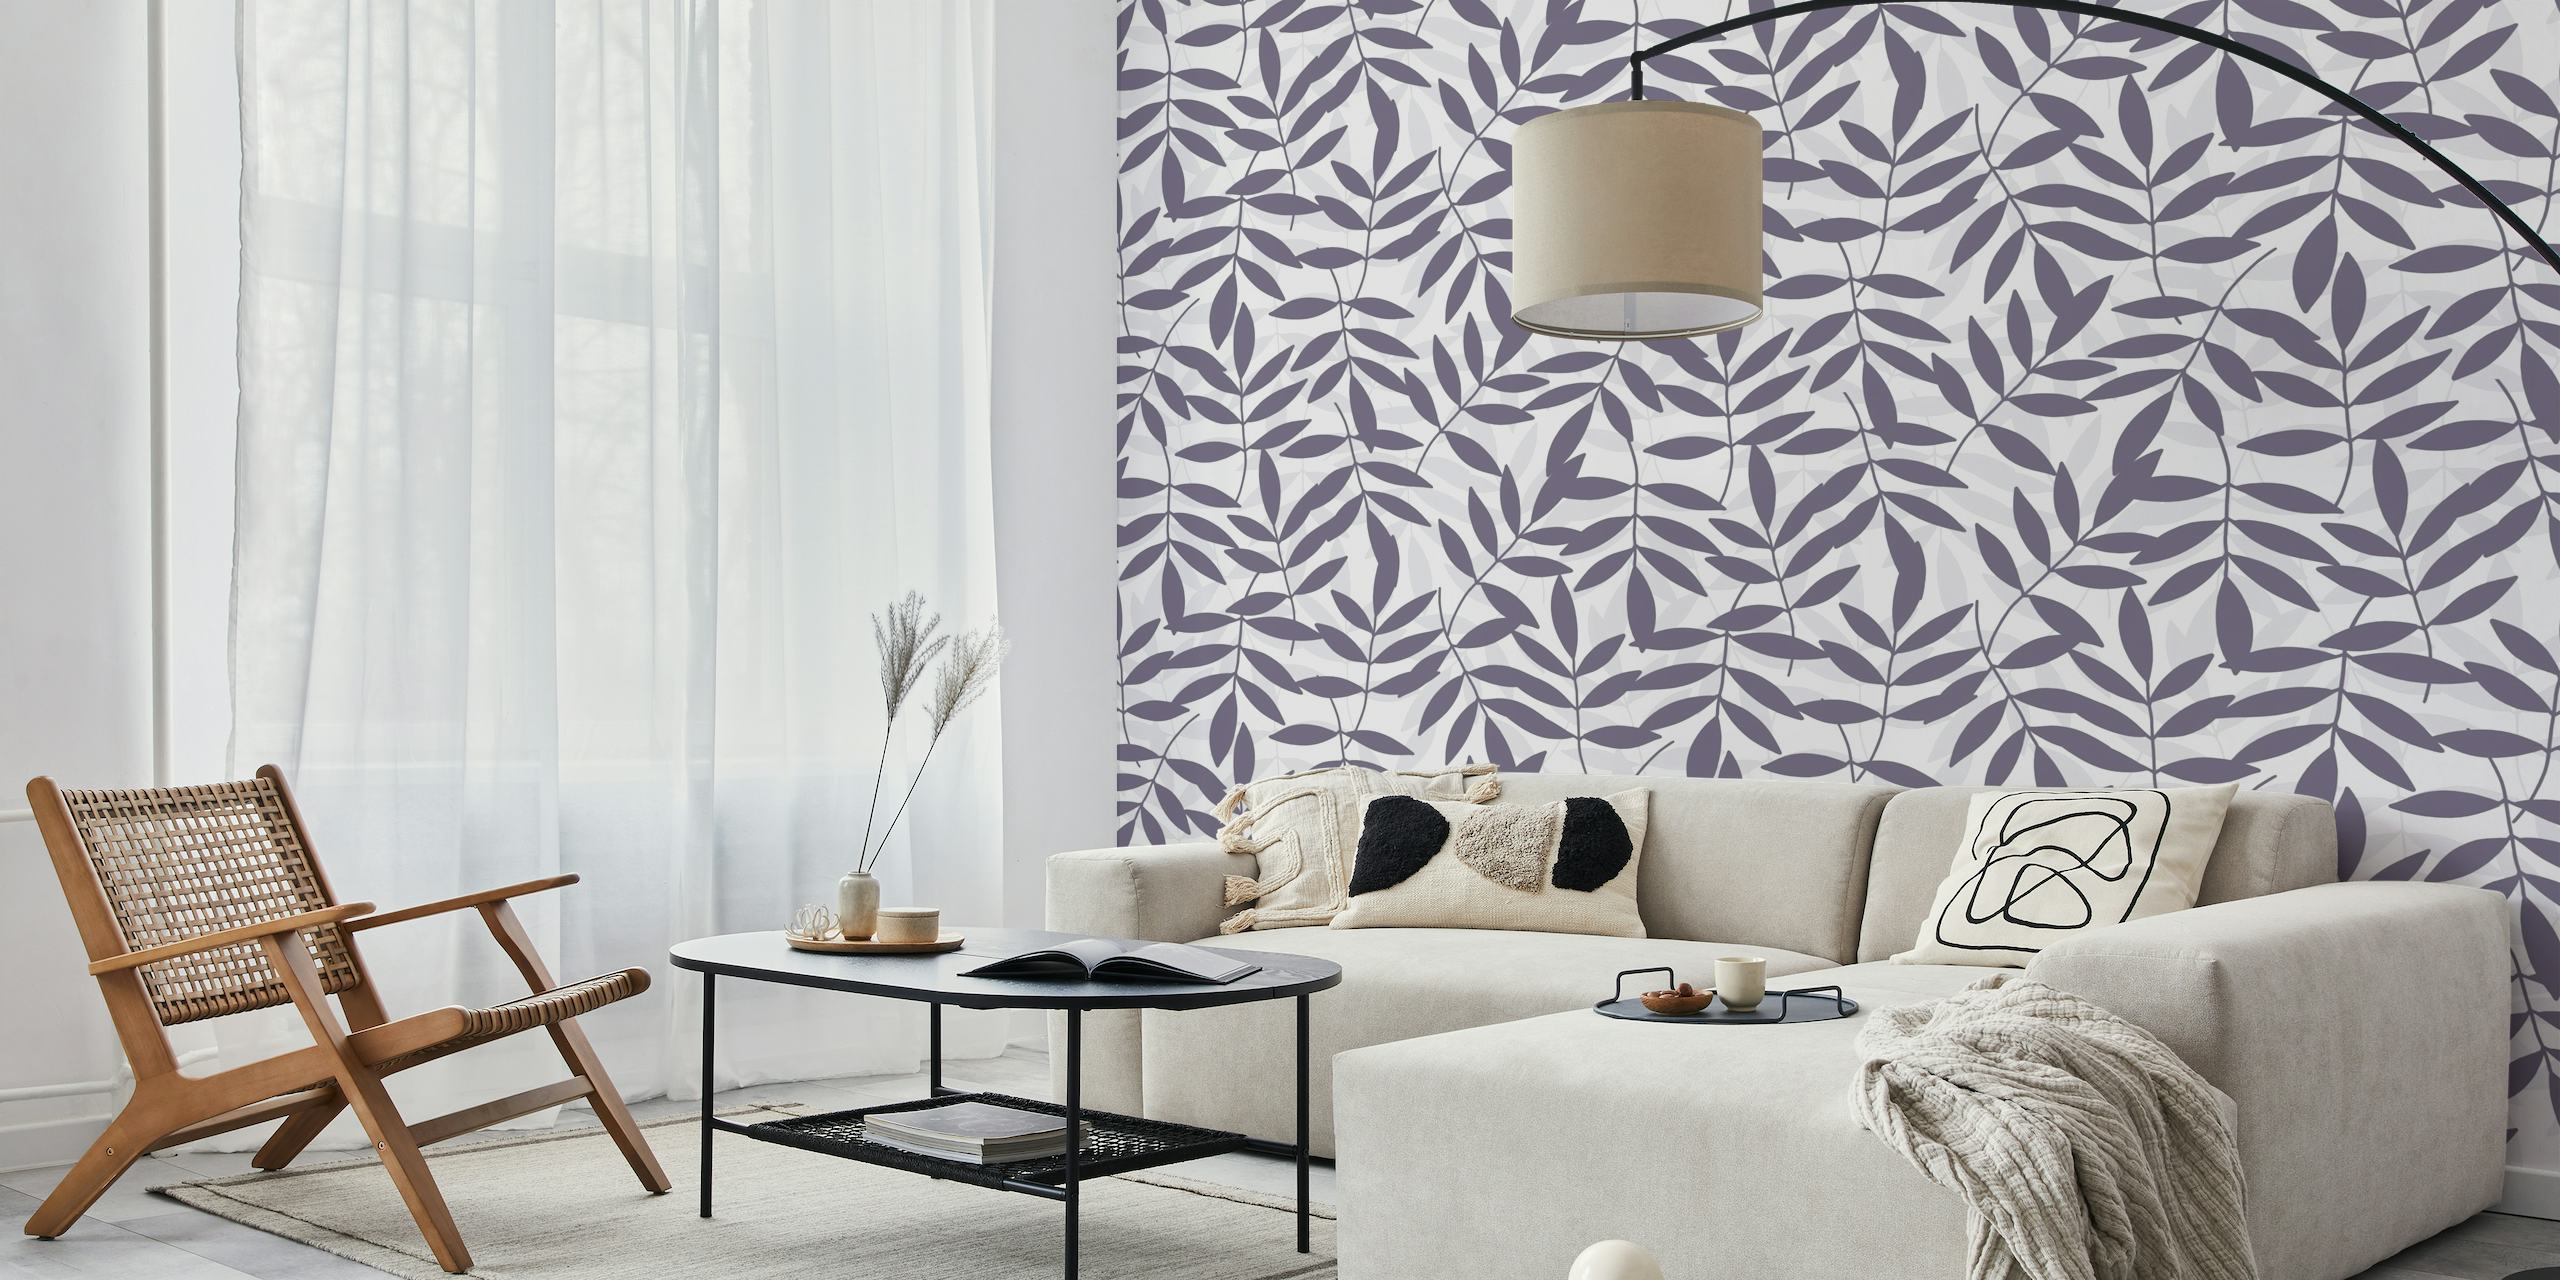 Purple leaves pattern wall mural on a grey background